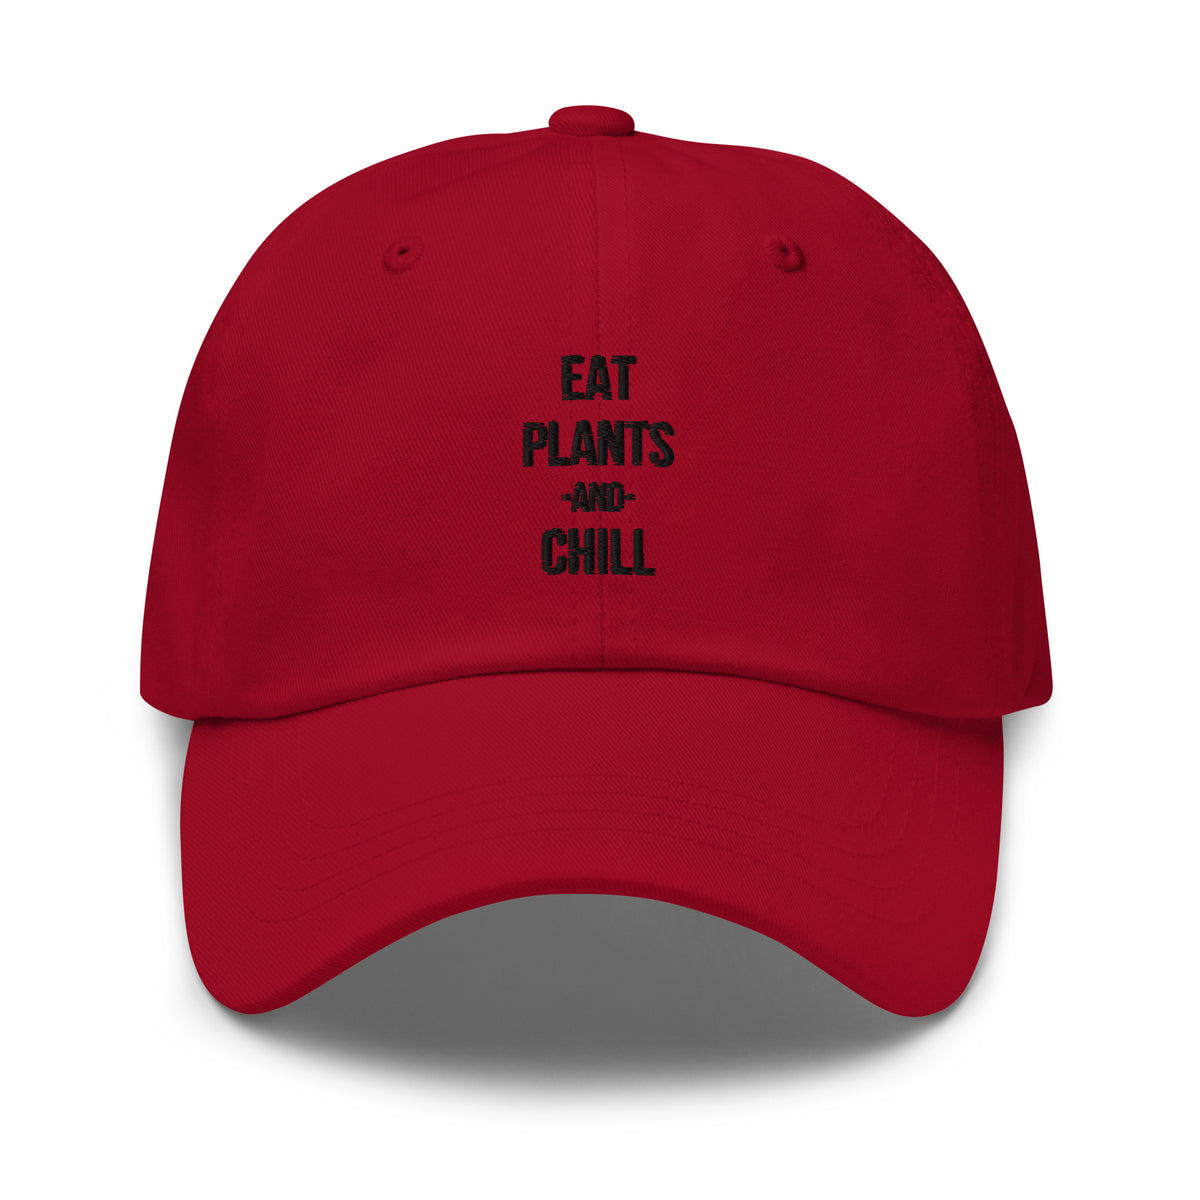 EAT PLANTS AND CHILL Dad hat